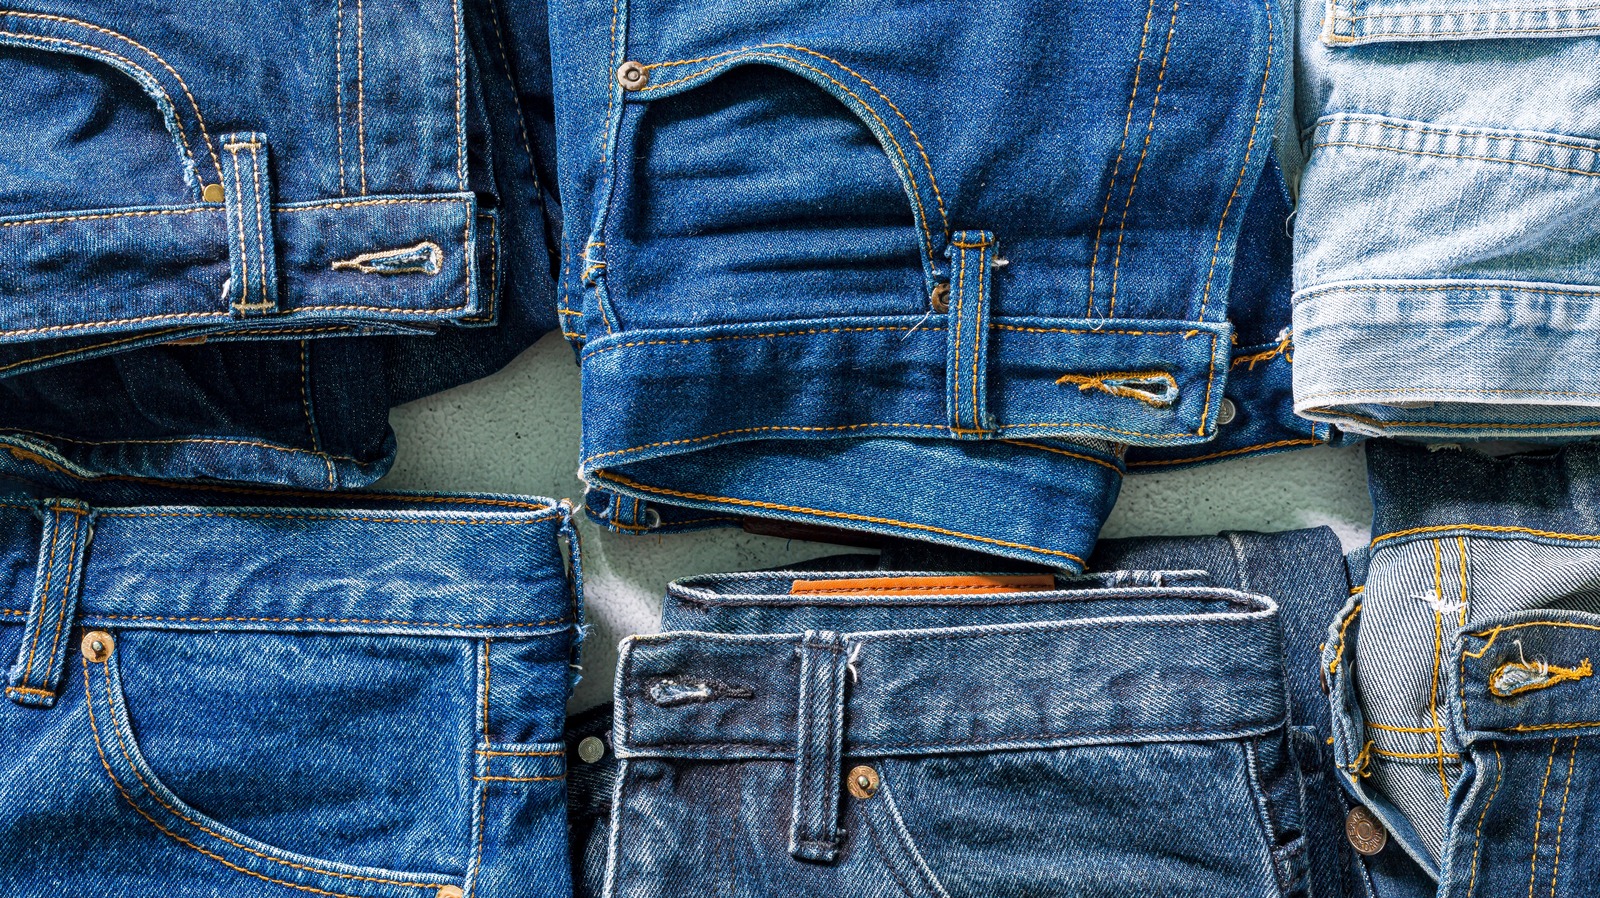 Tips That Will Help You Buy The Highest Quality Jeans